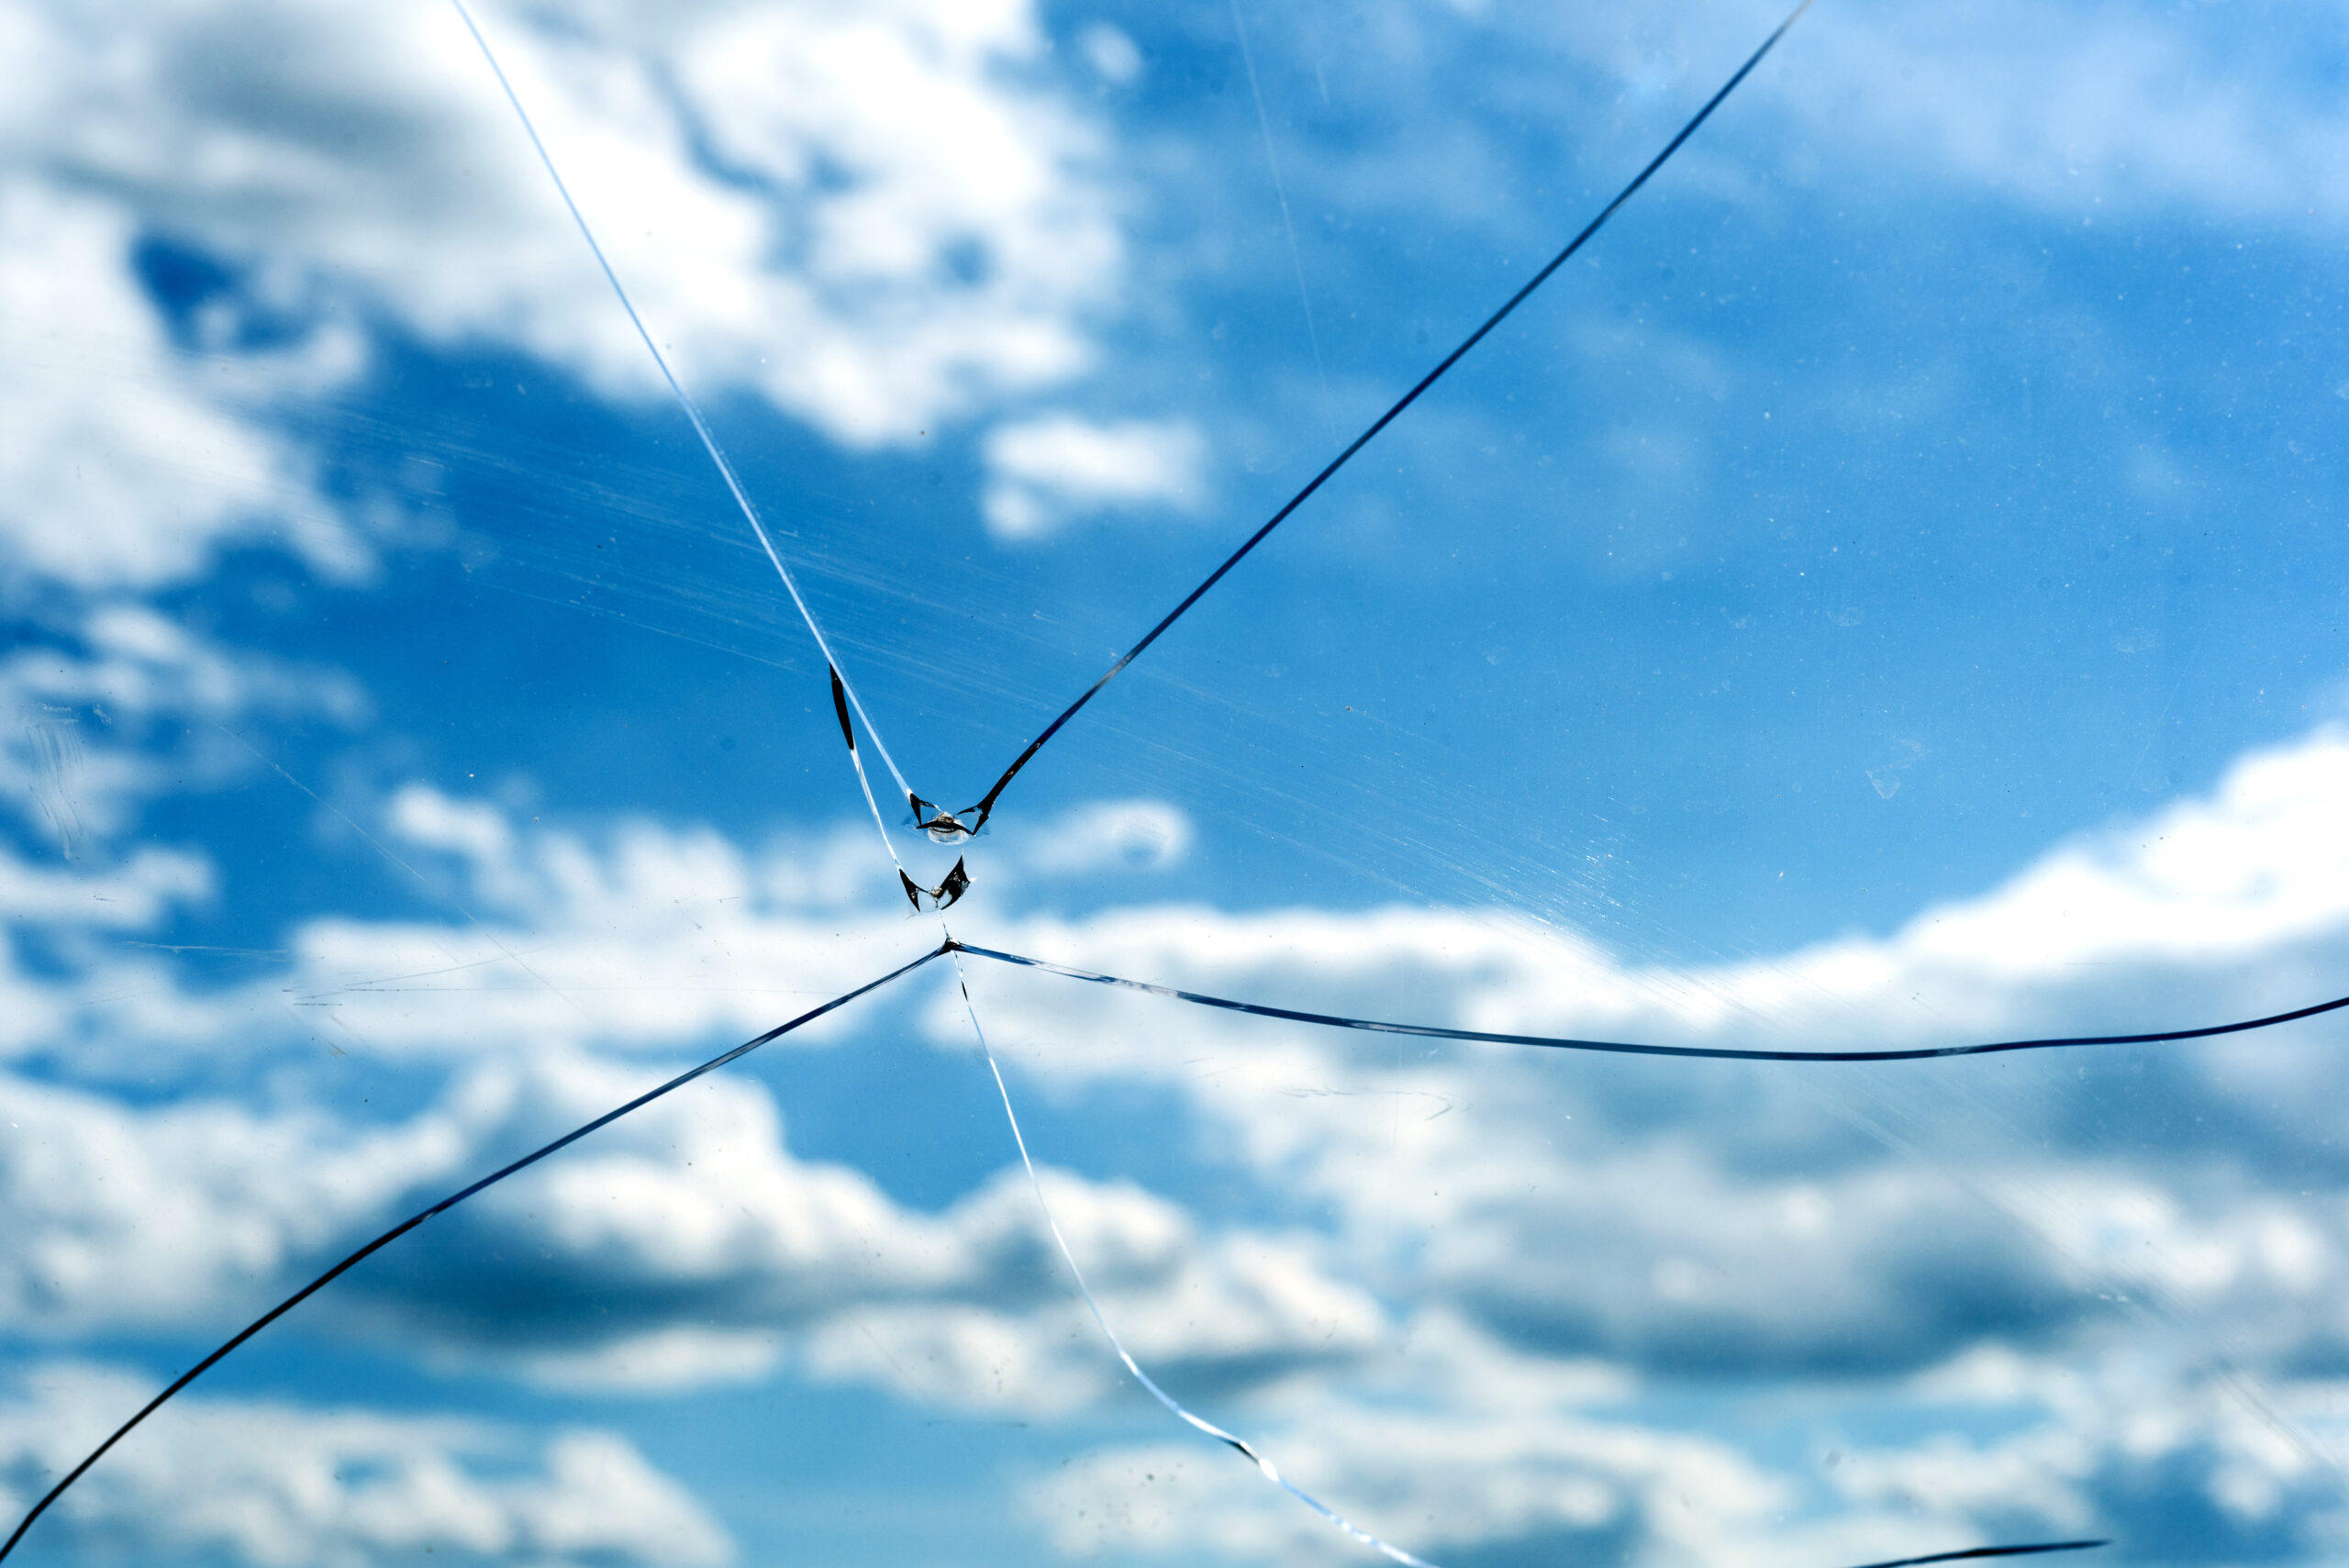 Single accurate cracked glass window with a blue sky background and white summer clouds